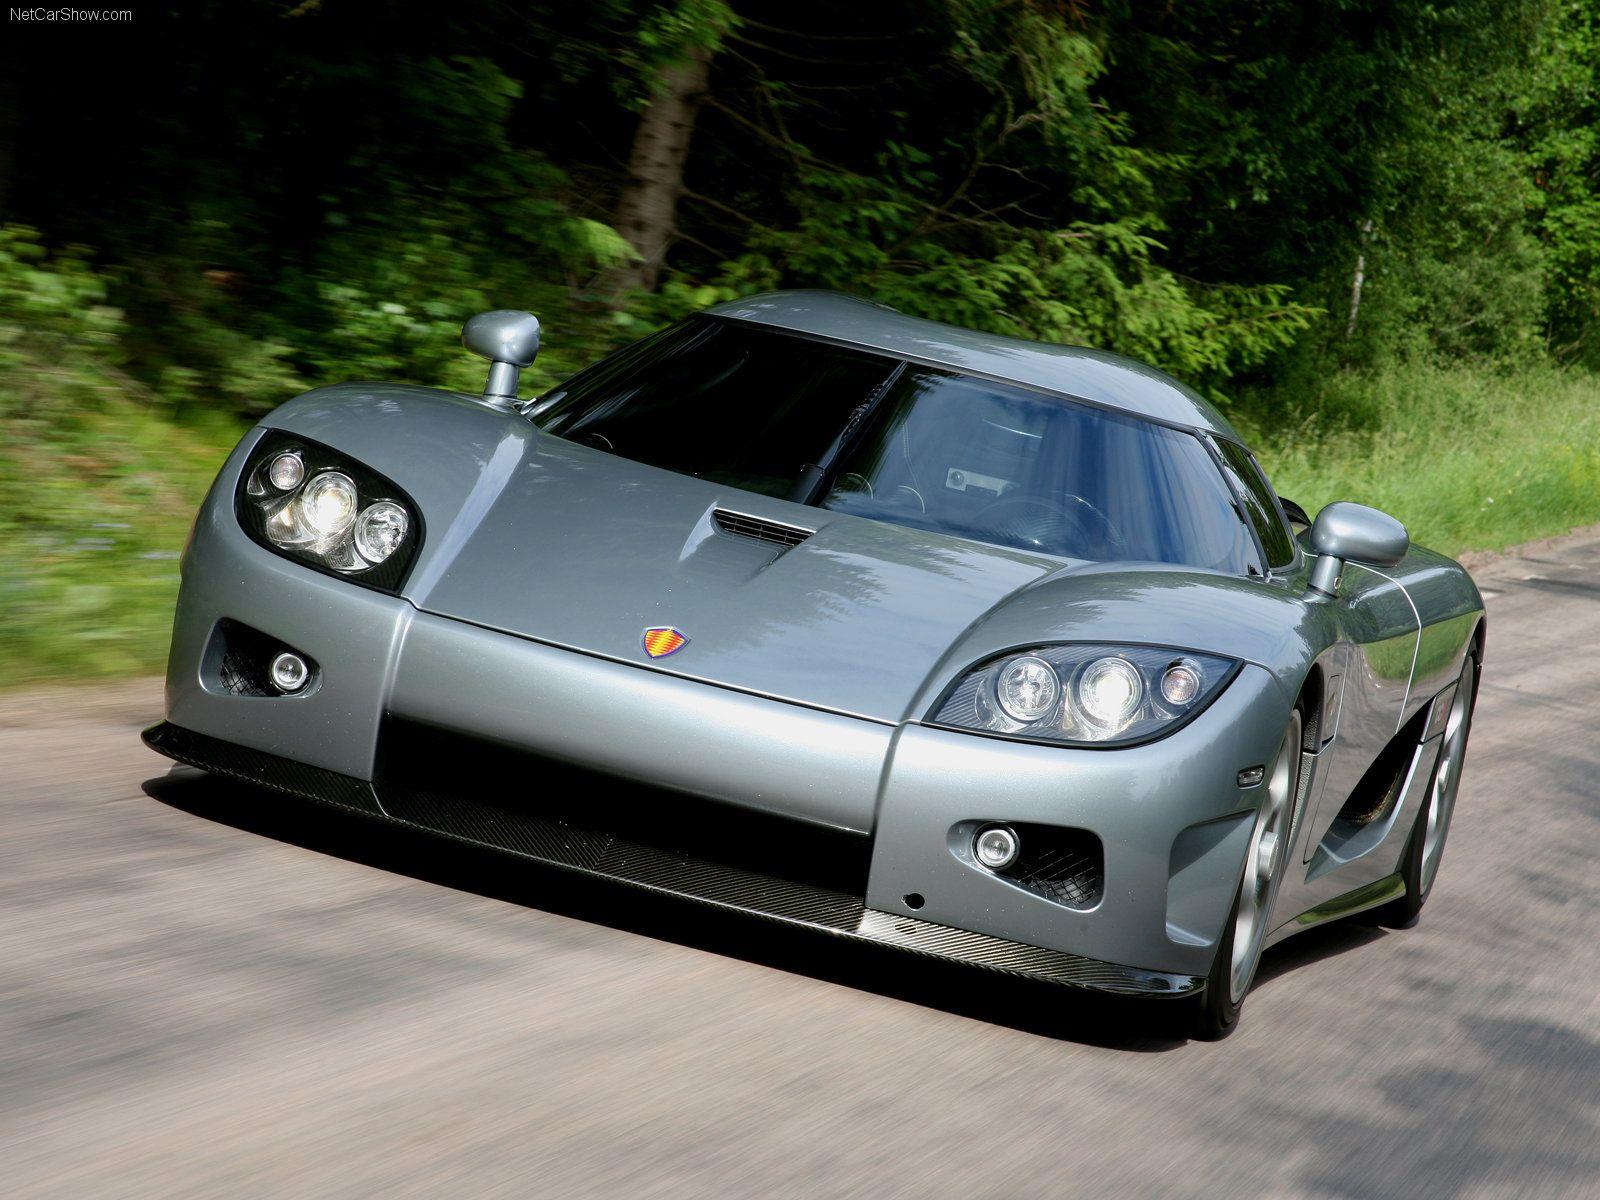 cars Information new: Most Expensive Cars Wallpaper